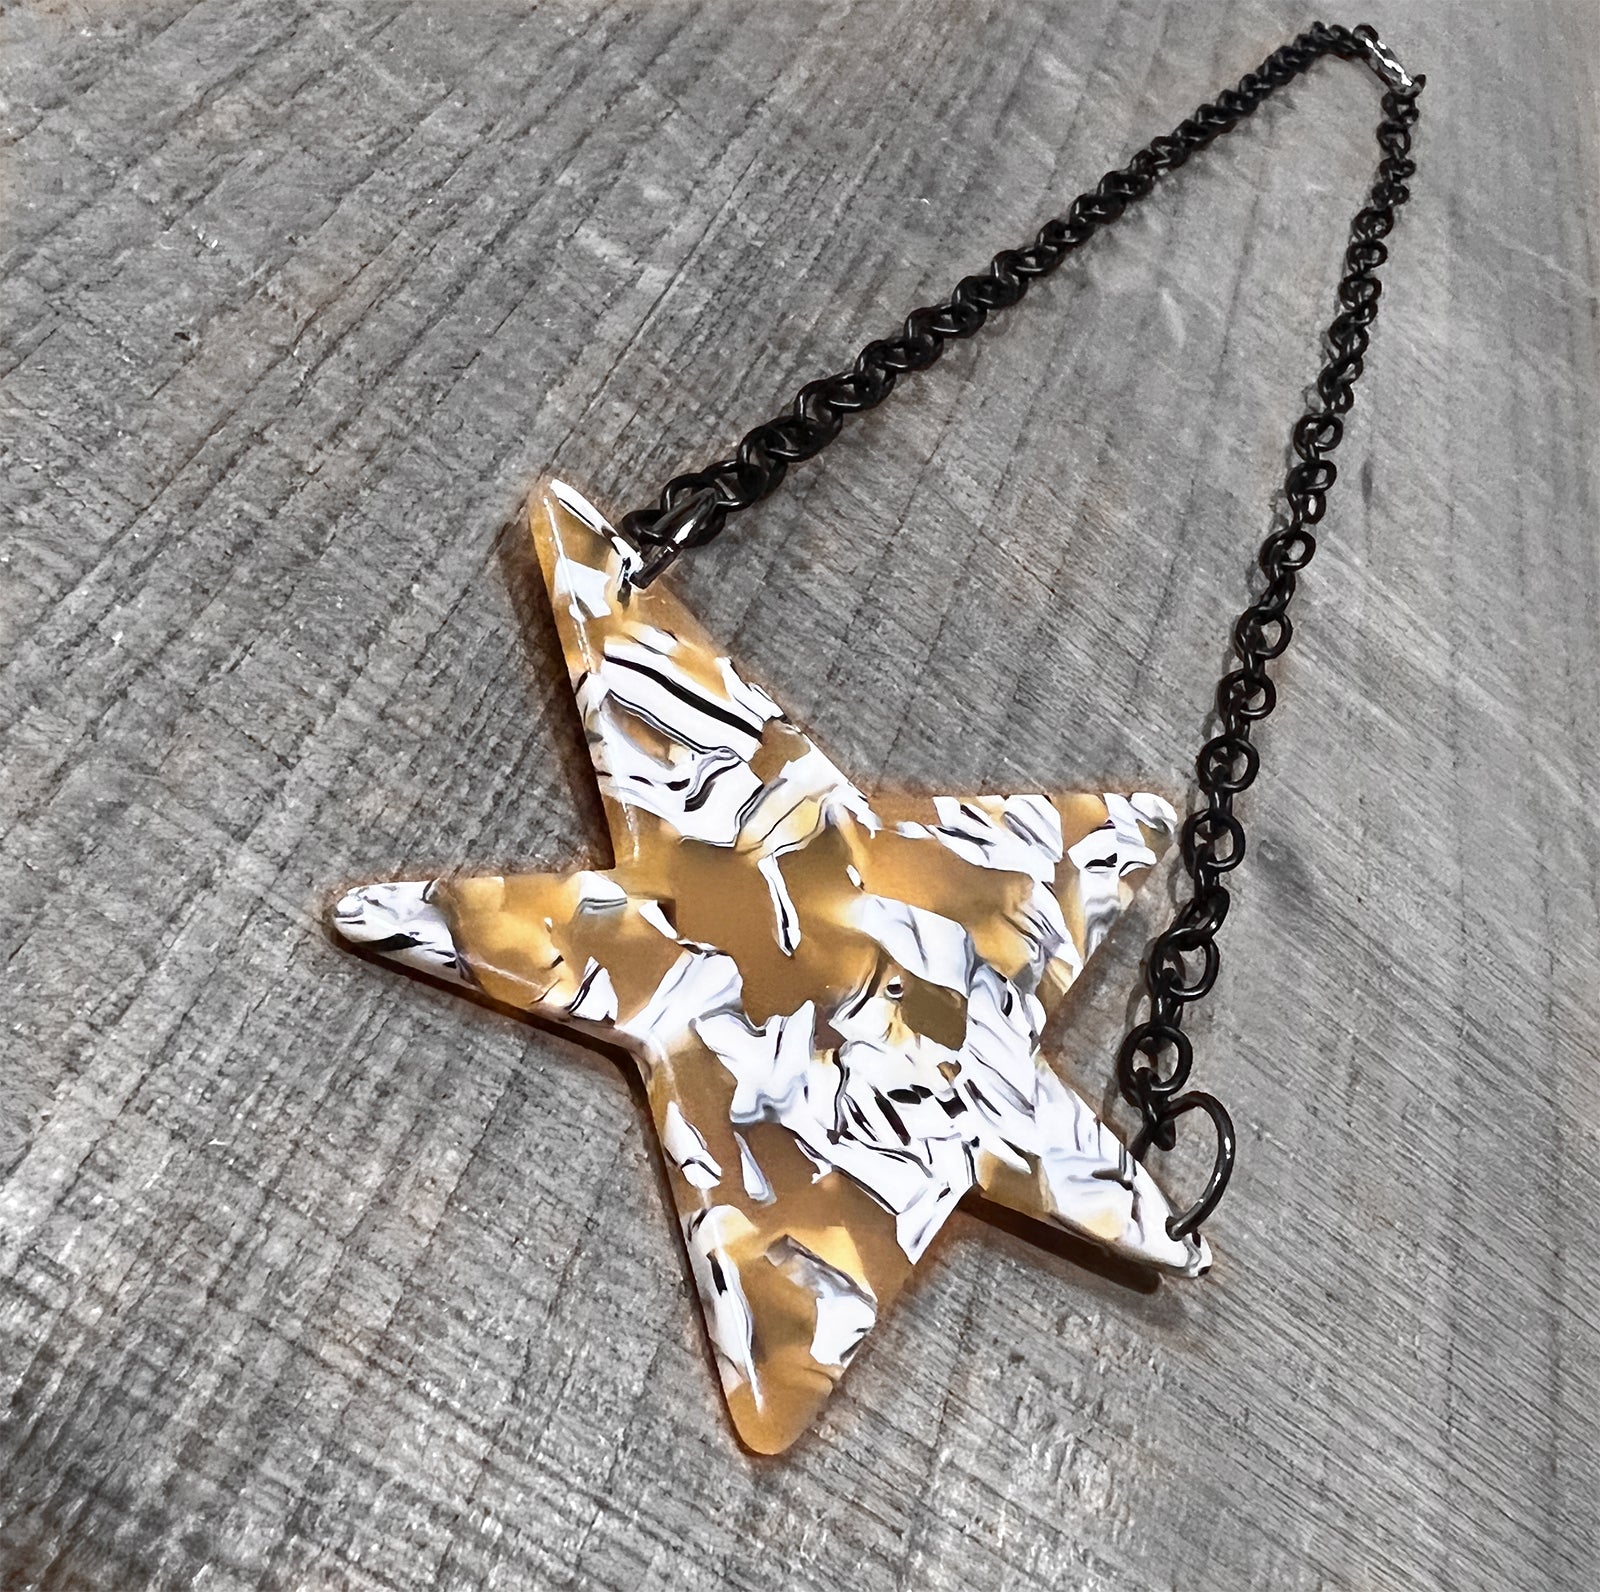 Acrylic Tortoise Shell Star Necklace on Black Chain